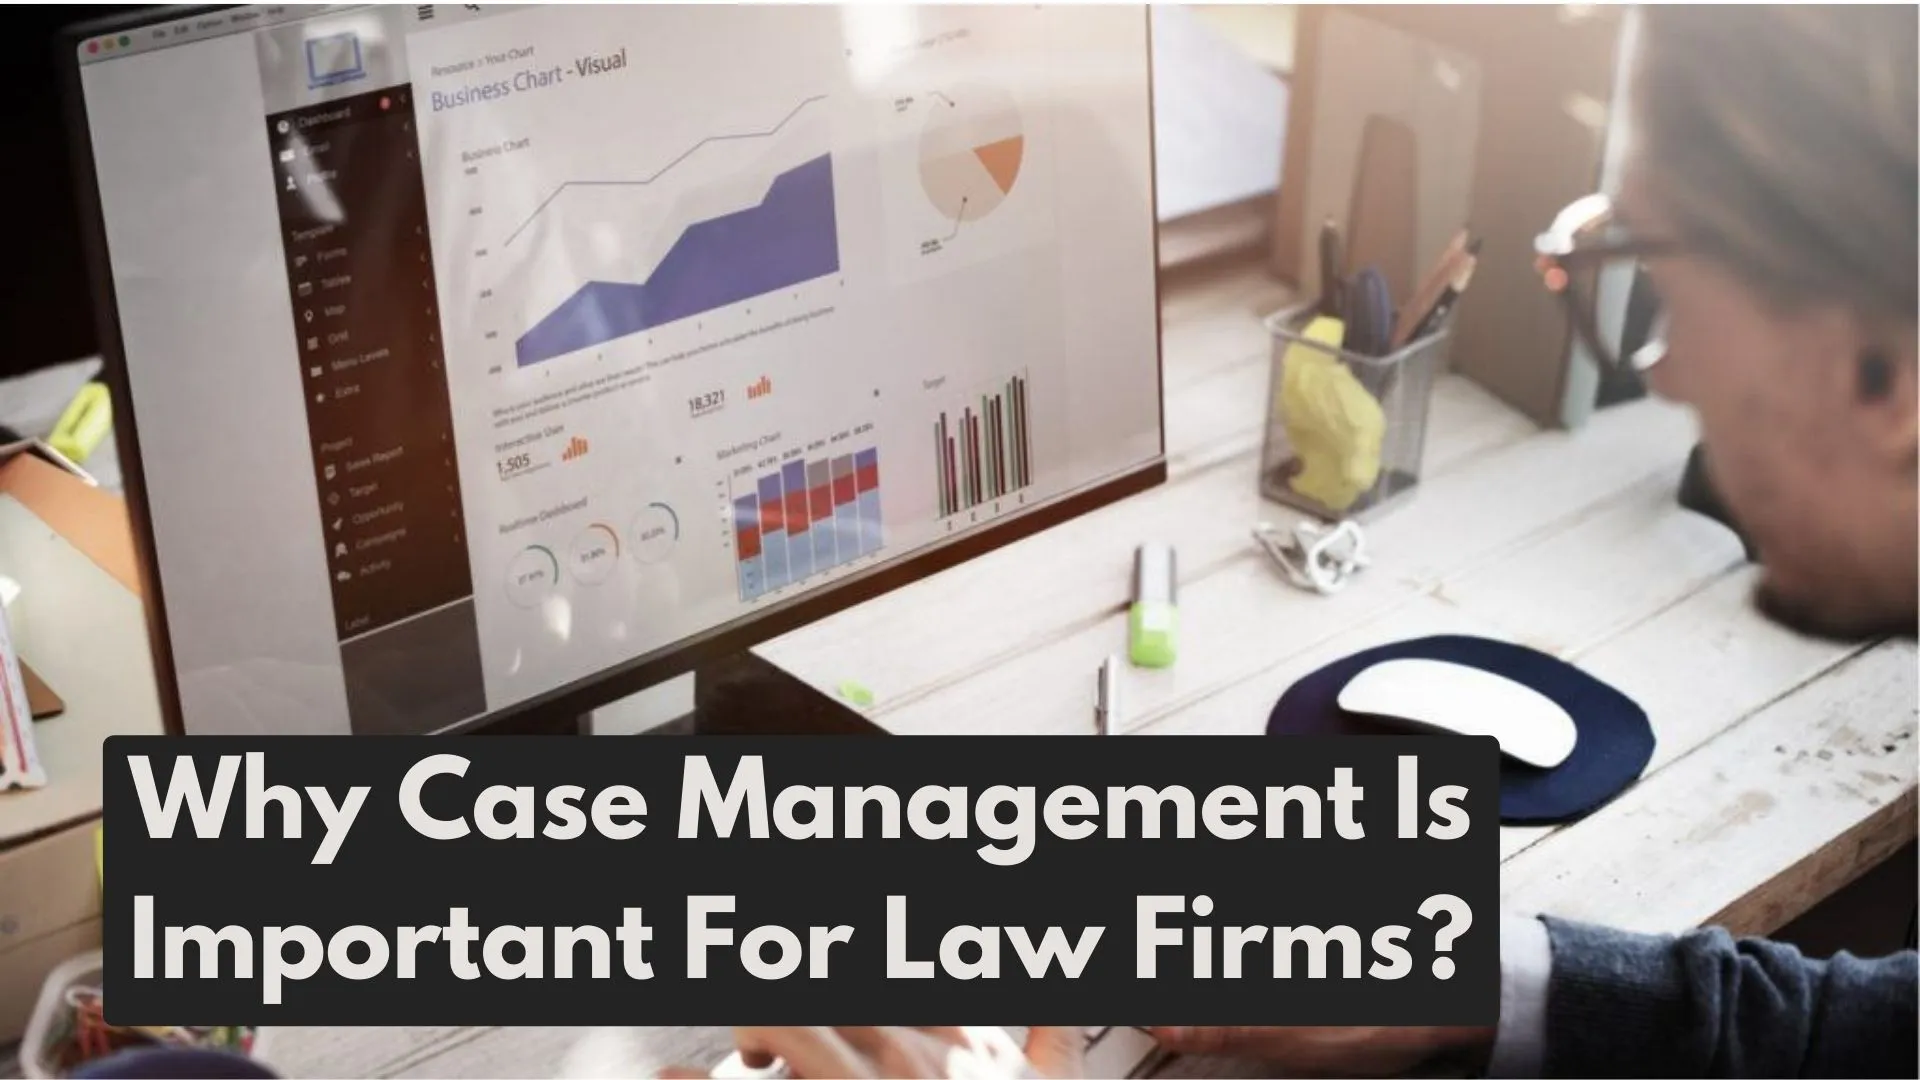 This is Why Case Management Is Important For Legal Sector